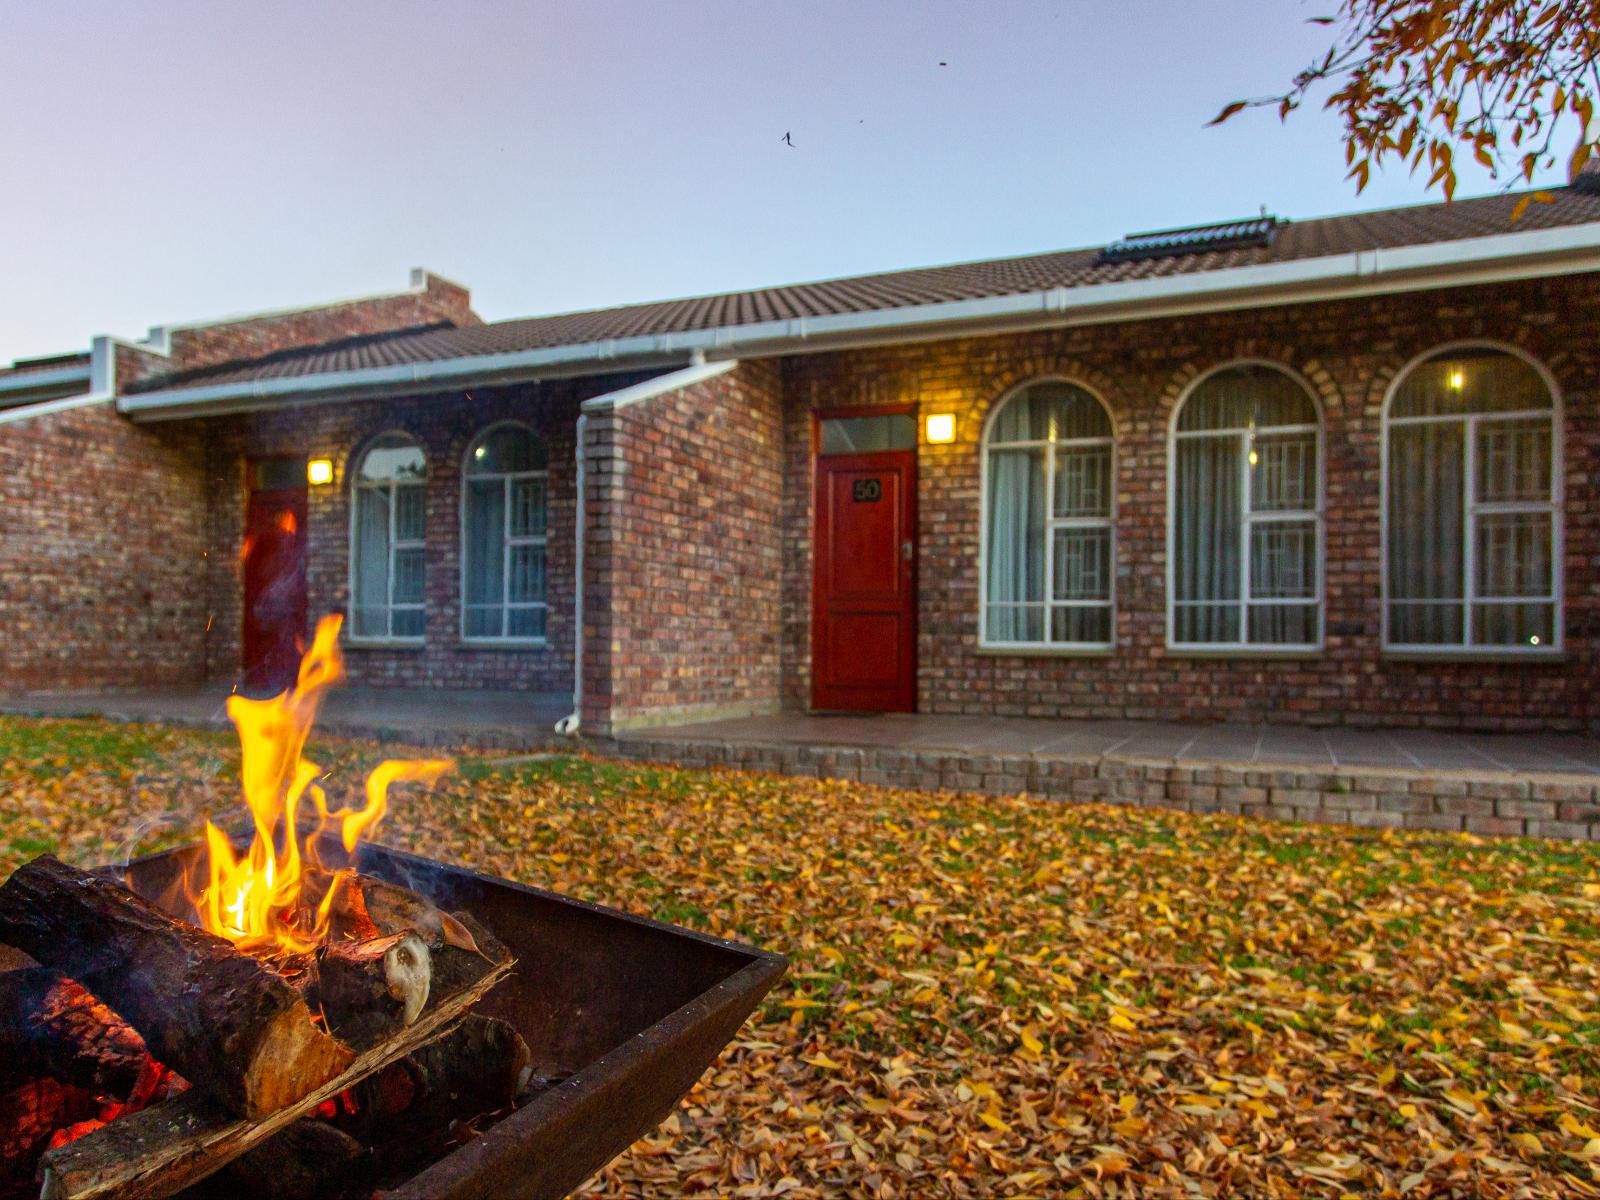 Kleinplaas Oudtshoorn Western Cape South Africa Complementary Colors, Fire, Nature, House, Building, Architecture